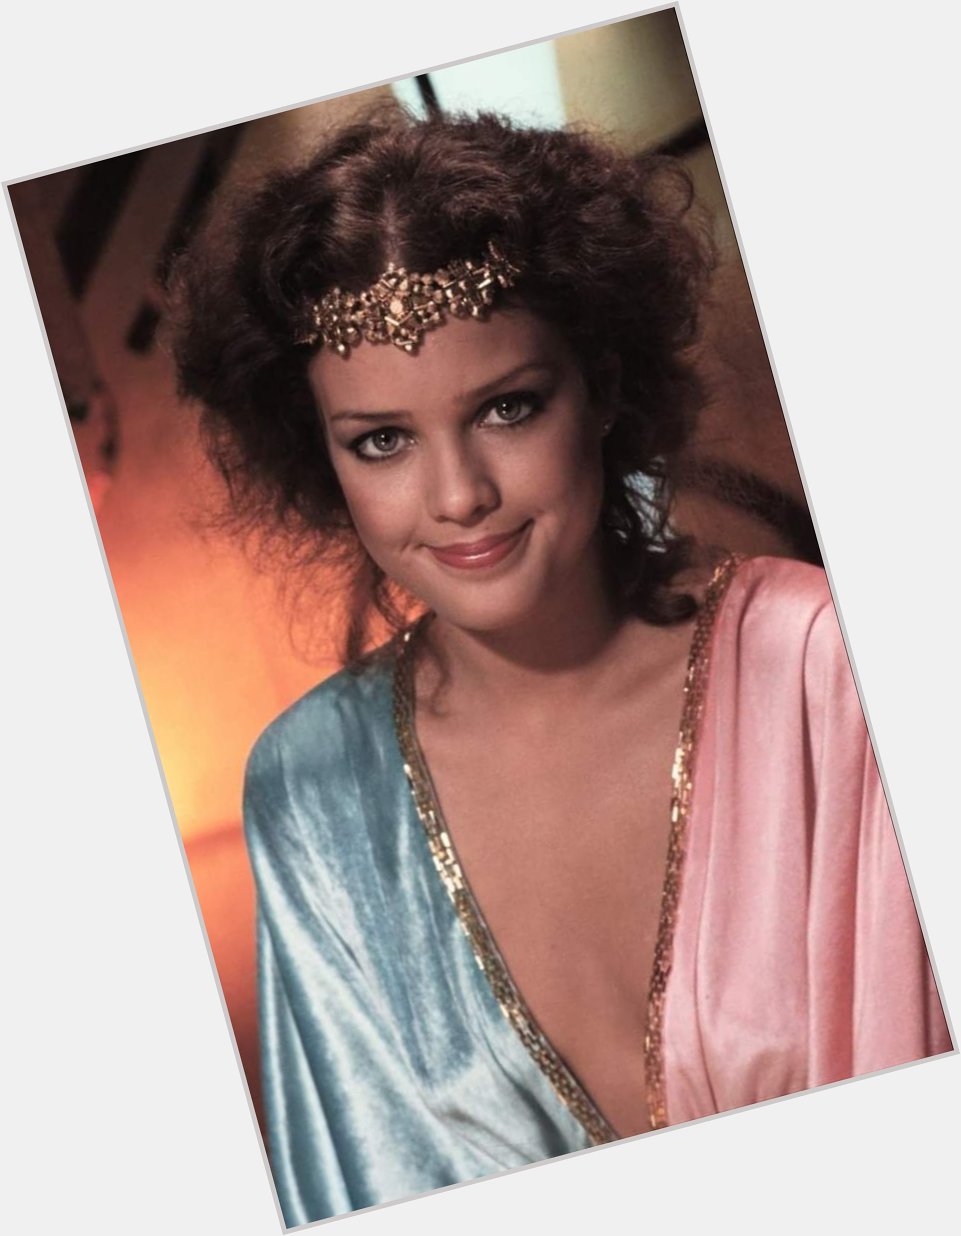 Happy Birthday Canadian actress Melody Anderson, now 67 years old. Dale Arden in Flash Gordon 1980. 